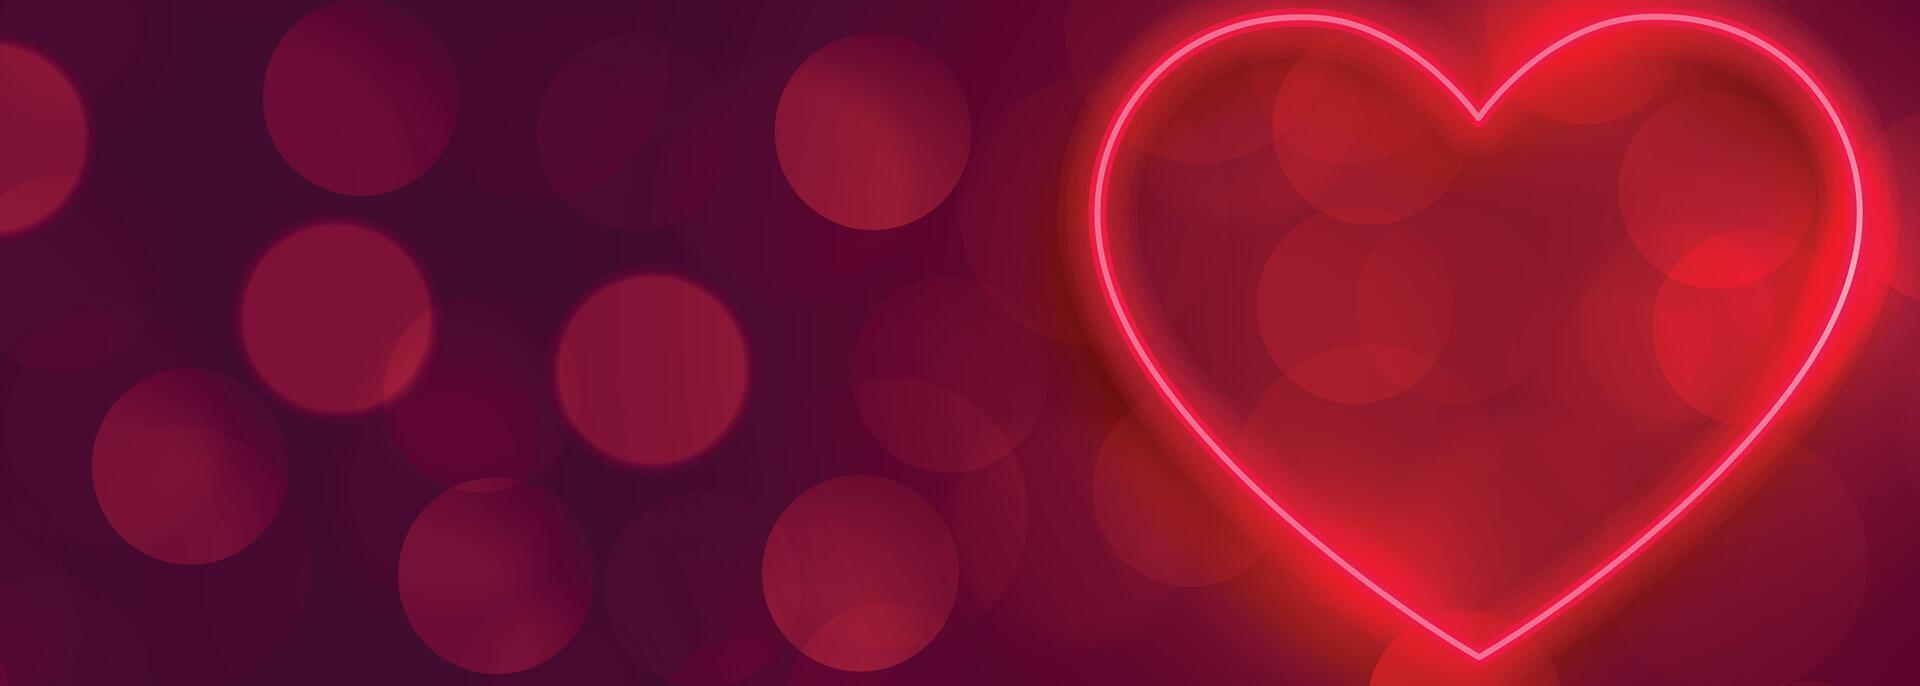 beautiful red valentines day hearts banner design vector